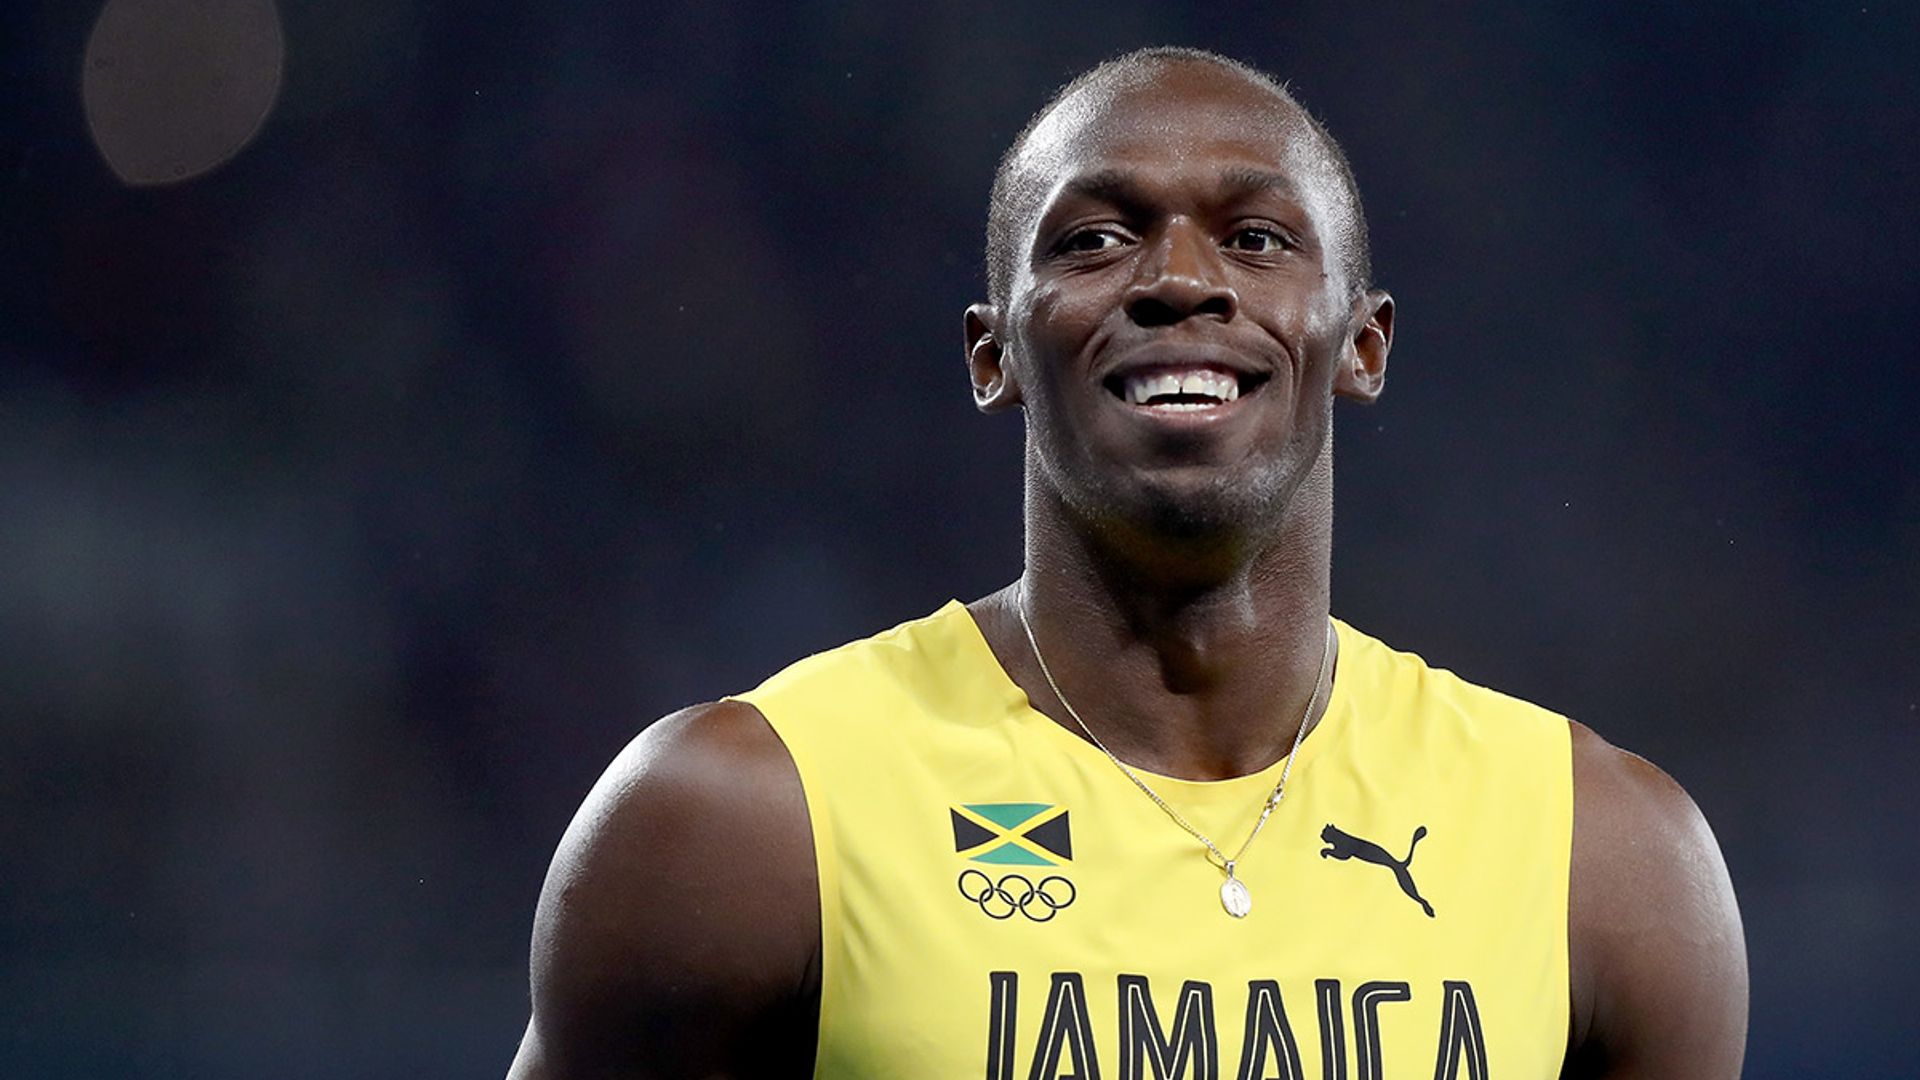 Usain Bolt finally reveals baby's unique name and shares first photo